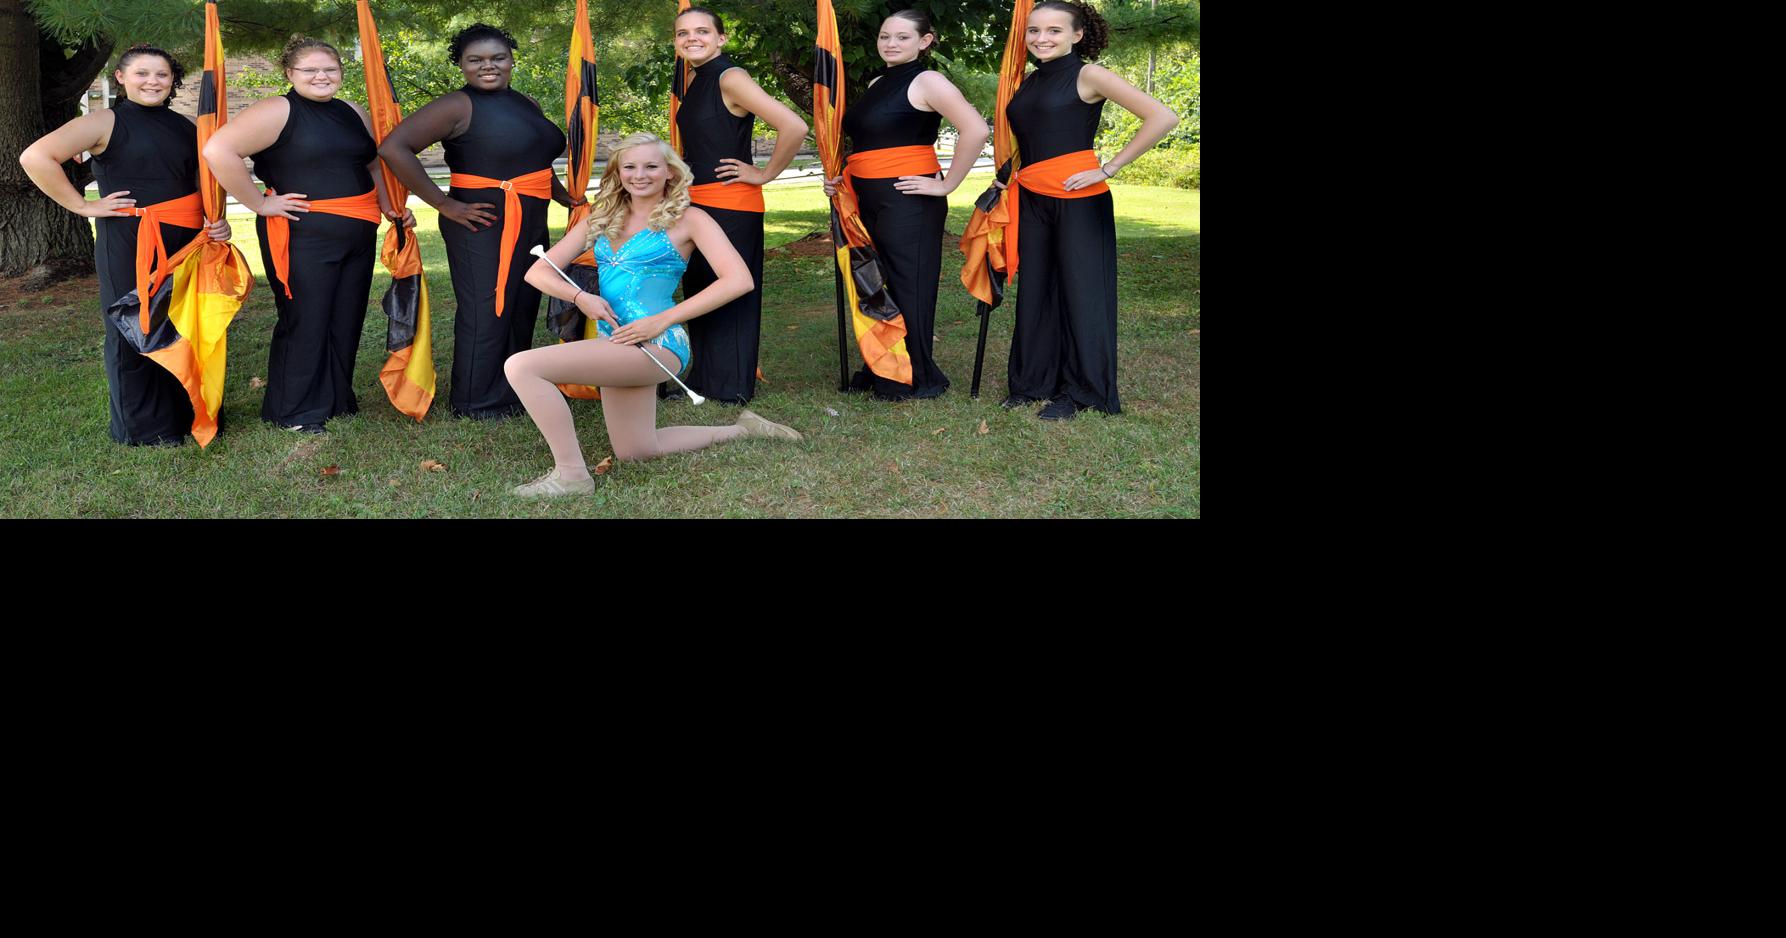 Photos Kanawha County bands to compete in Majorette Festival News